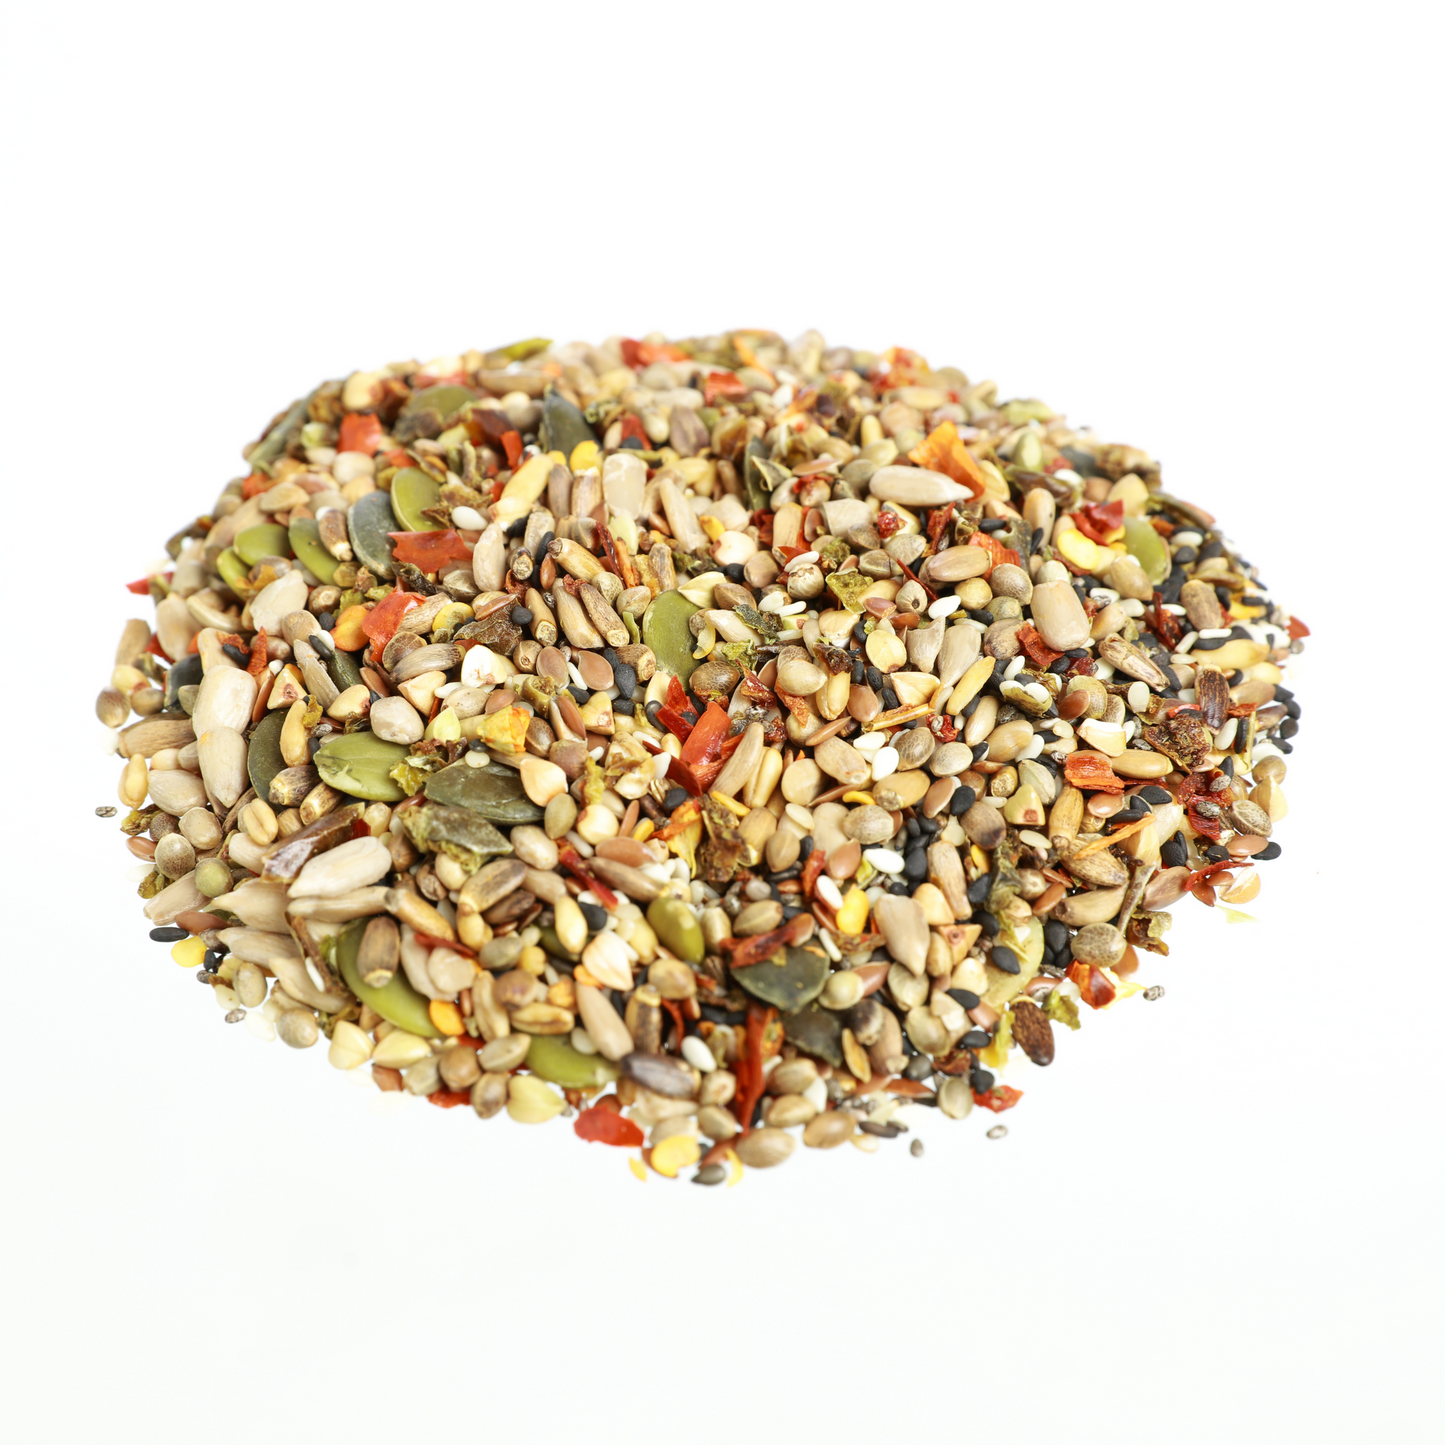 Spicy Seed Mix For Parrots - 500g